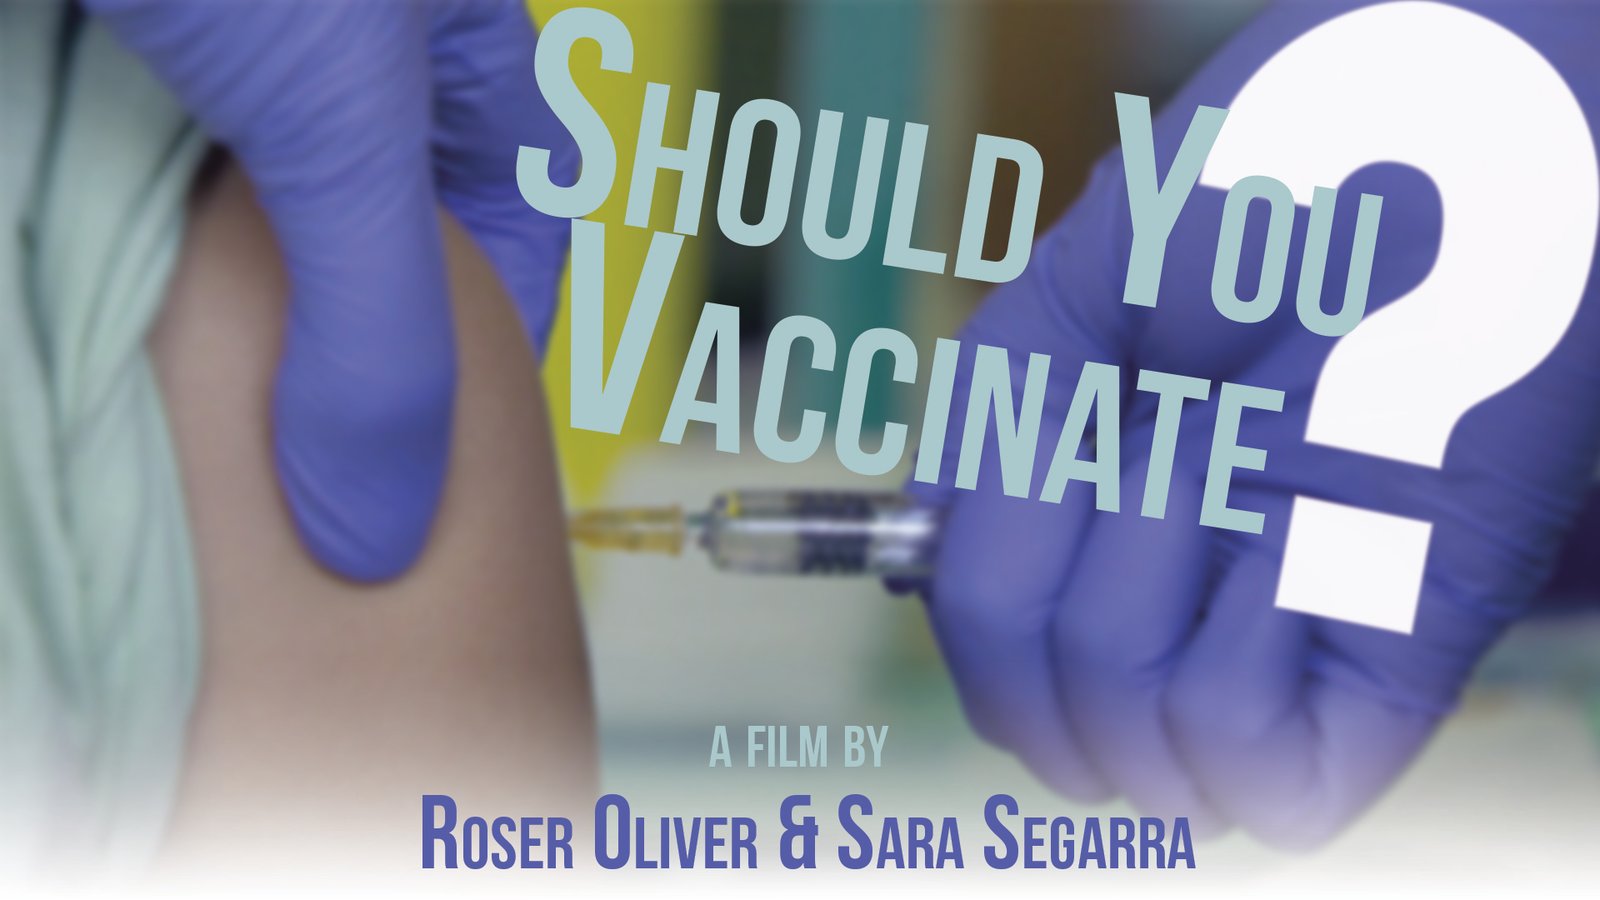 Should You Vaccinate? - Arguments For and Against Modern Vaccinations